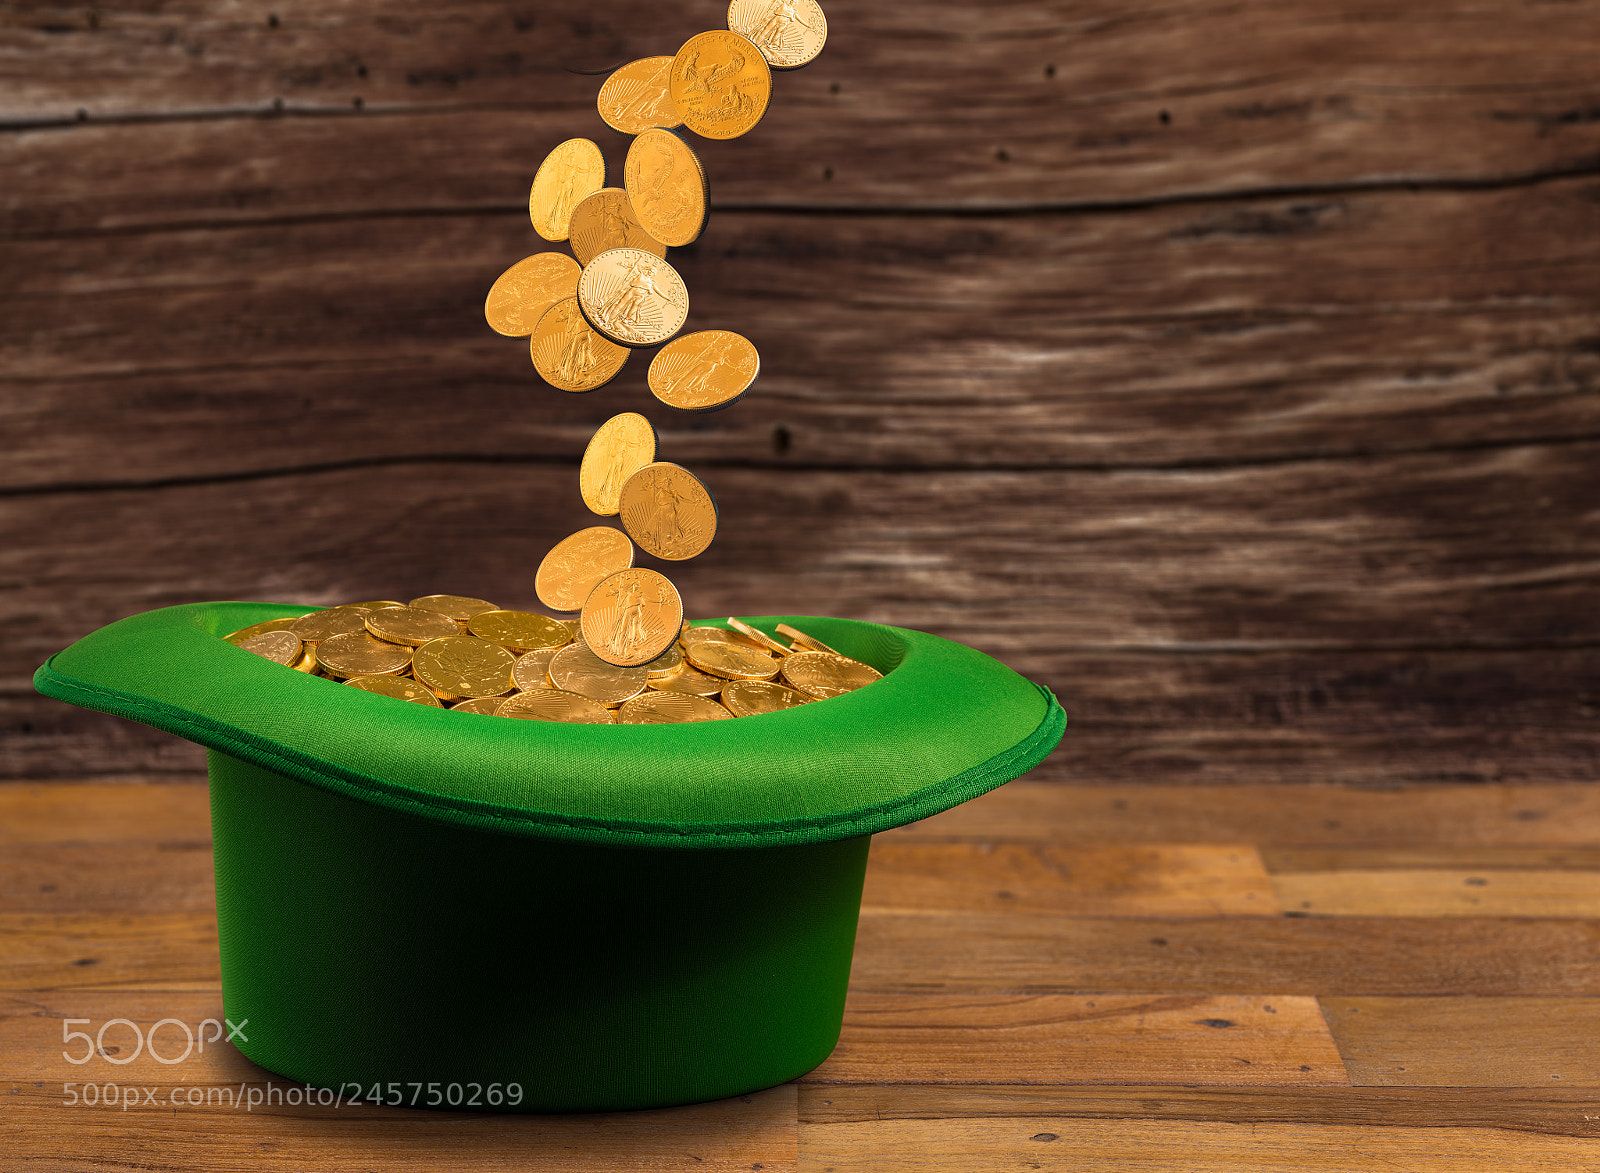 Sony a7R II sample photo. Pile of gold coins photography